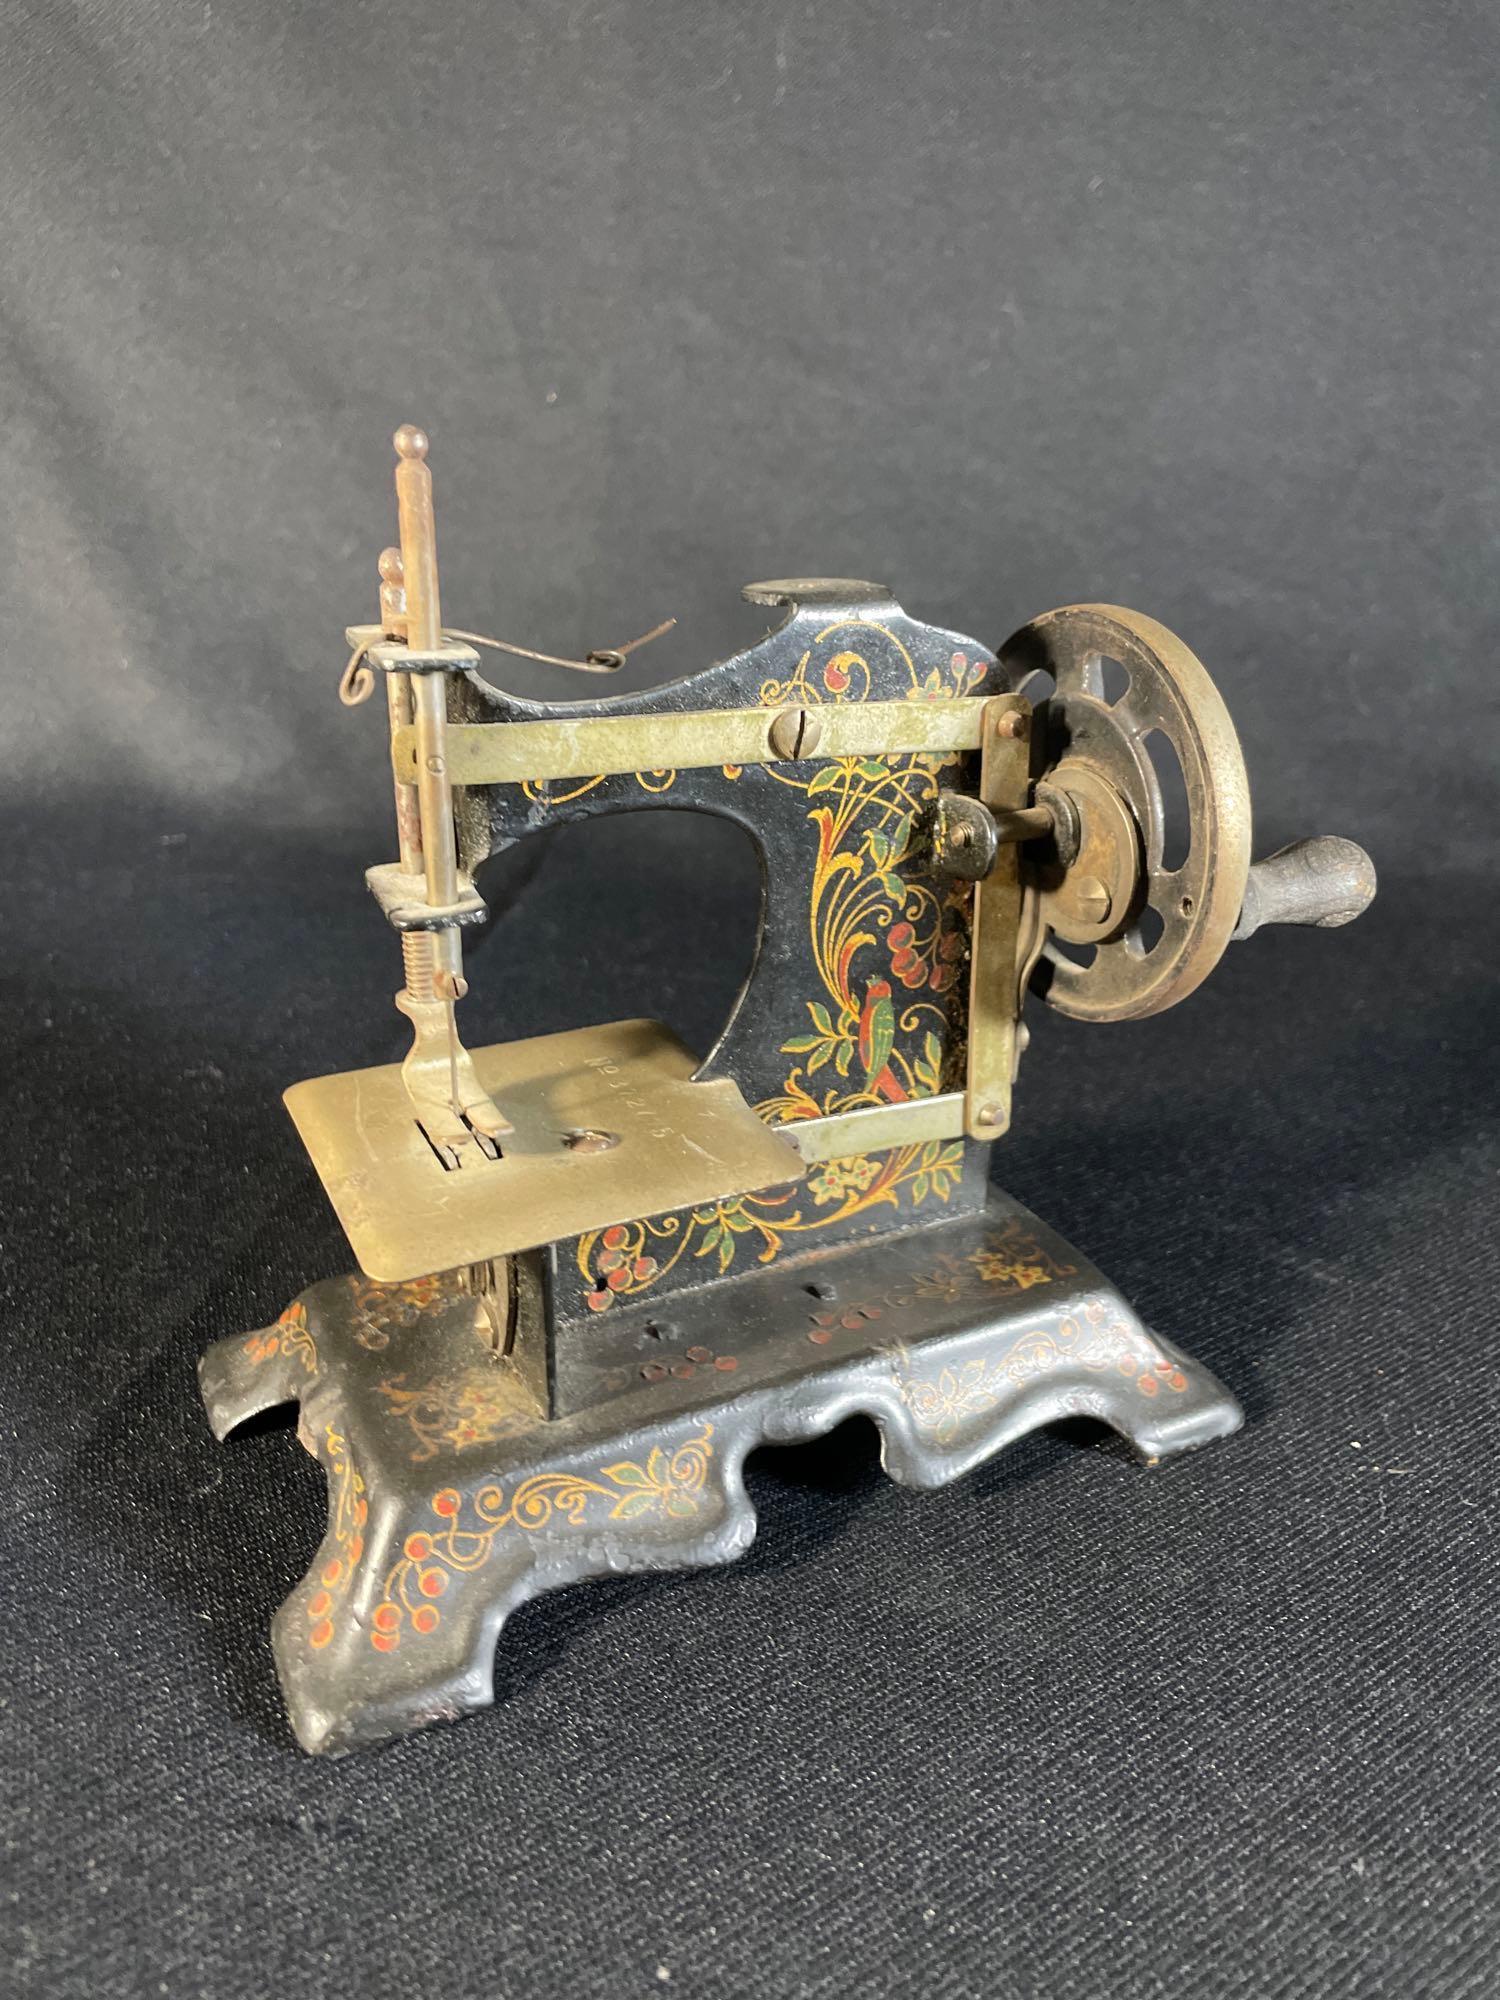 Muller No.5 toy sewing machine